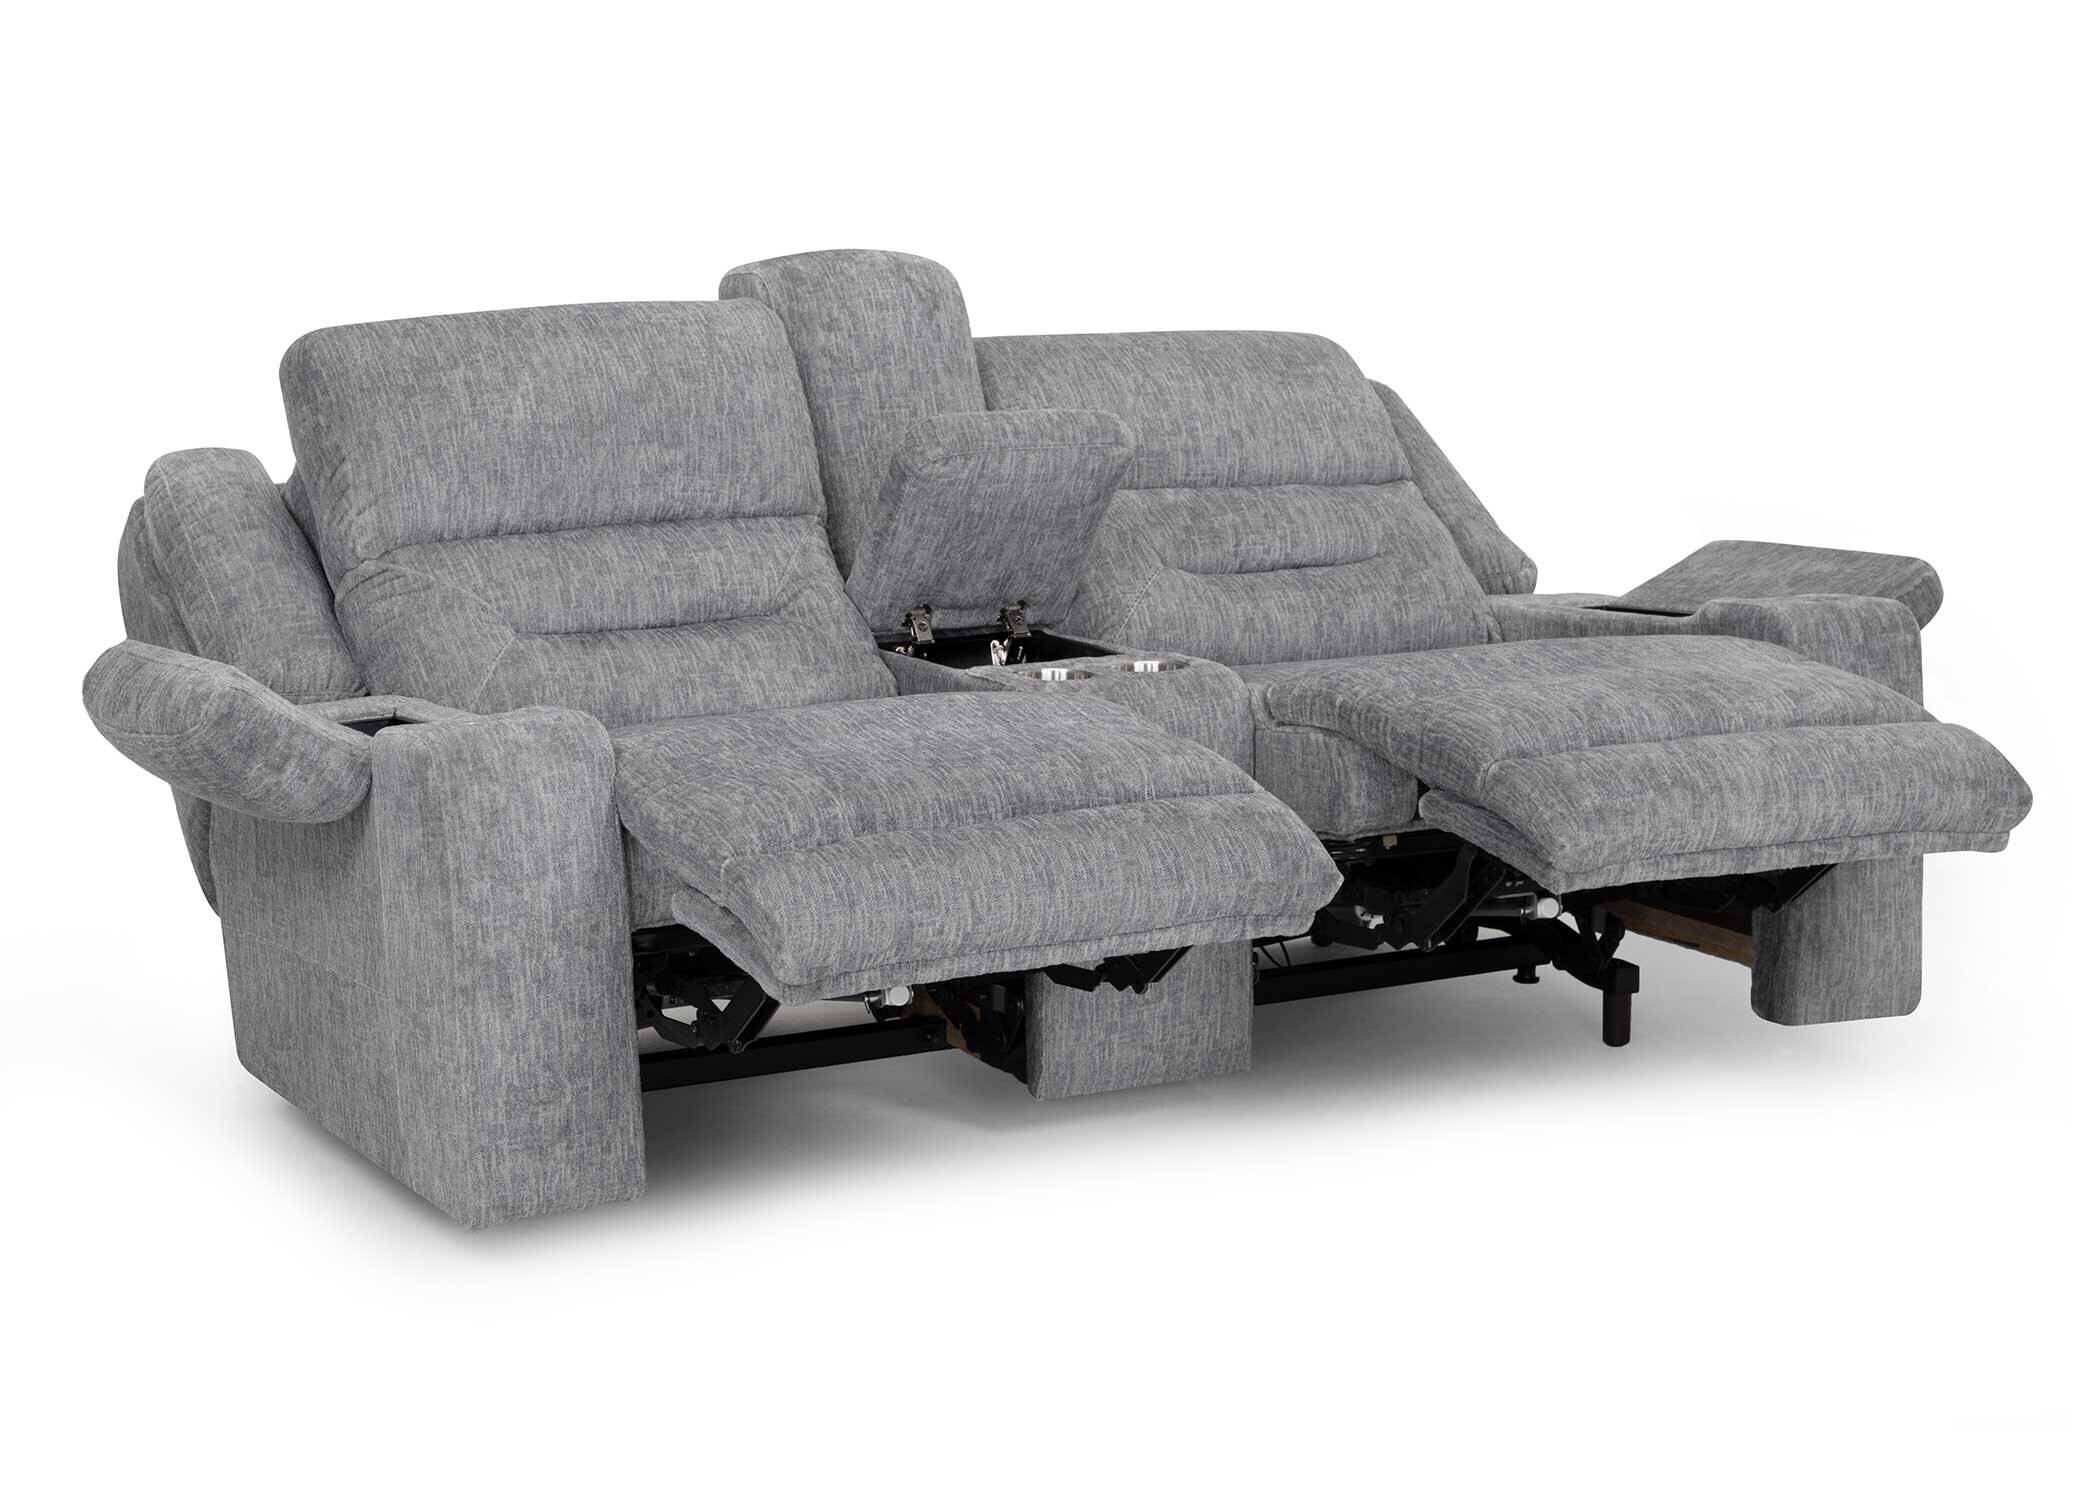  65235 Ace Reclining Console Loveseat in 1015-06 Plush Gray - Angled/Open 